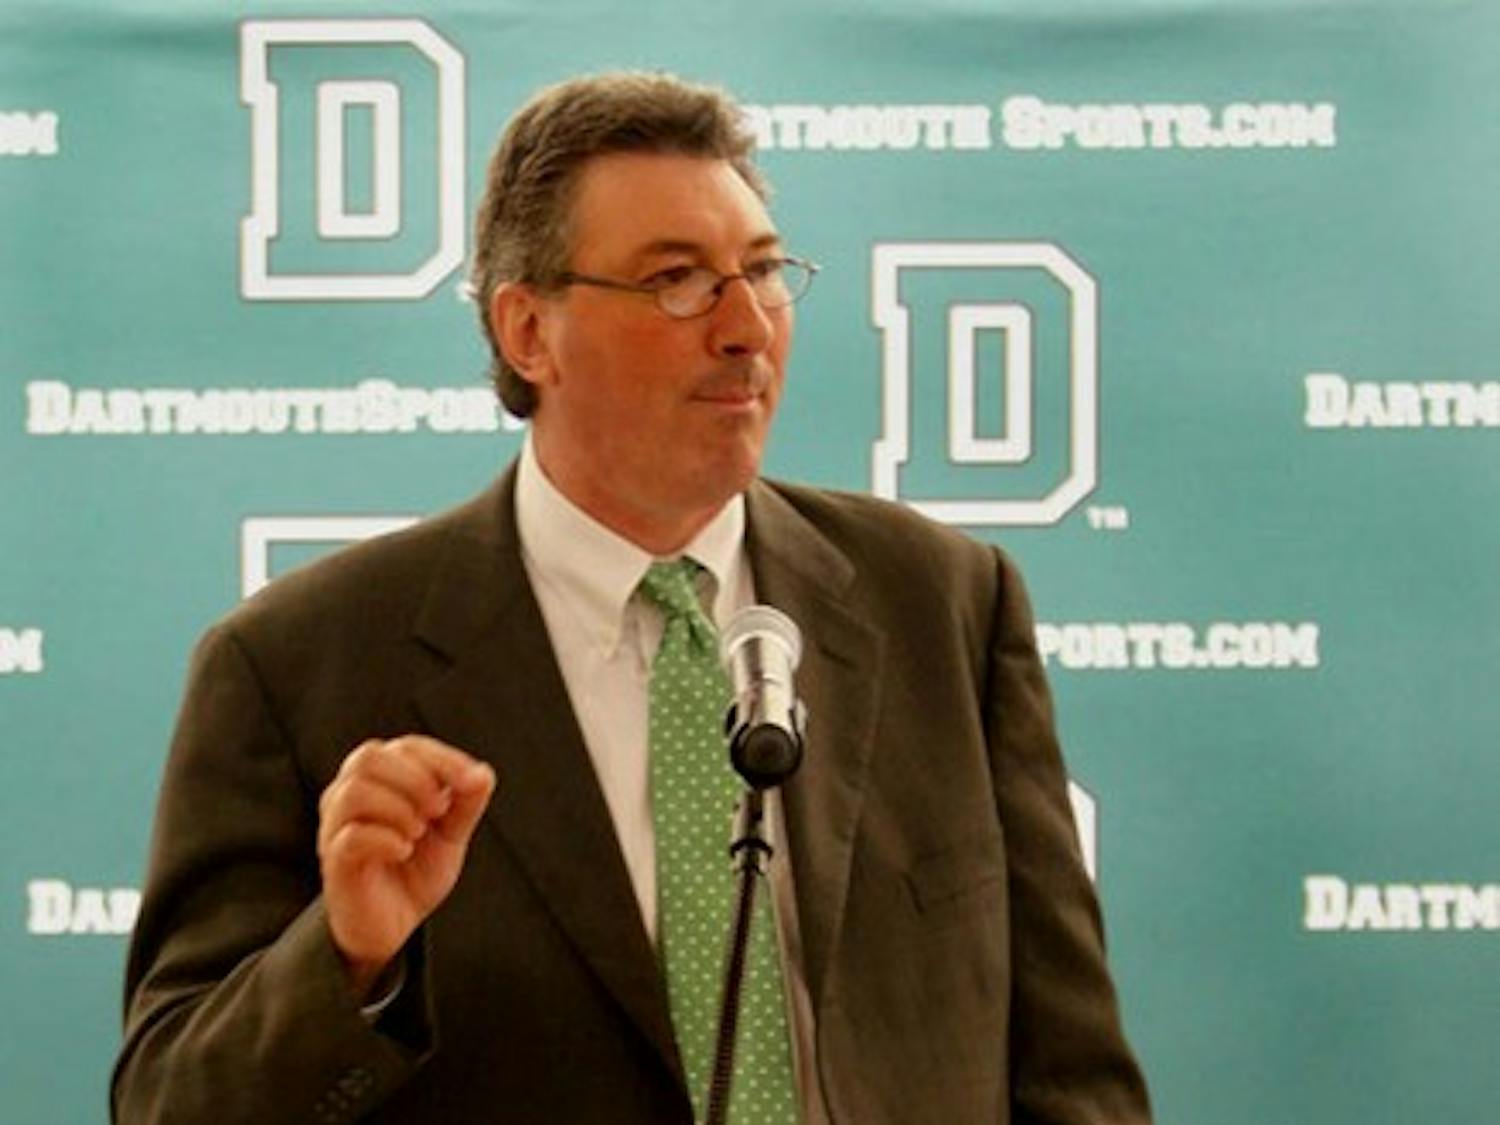 Harry Sheehy, the current athletic director at Williams College, will take over as Dartmouth's athletic director on Sept. 7.